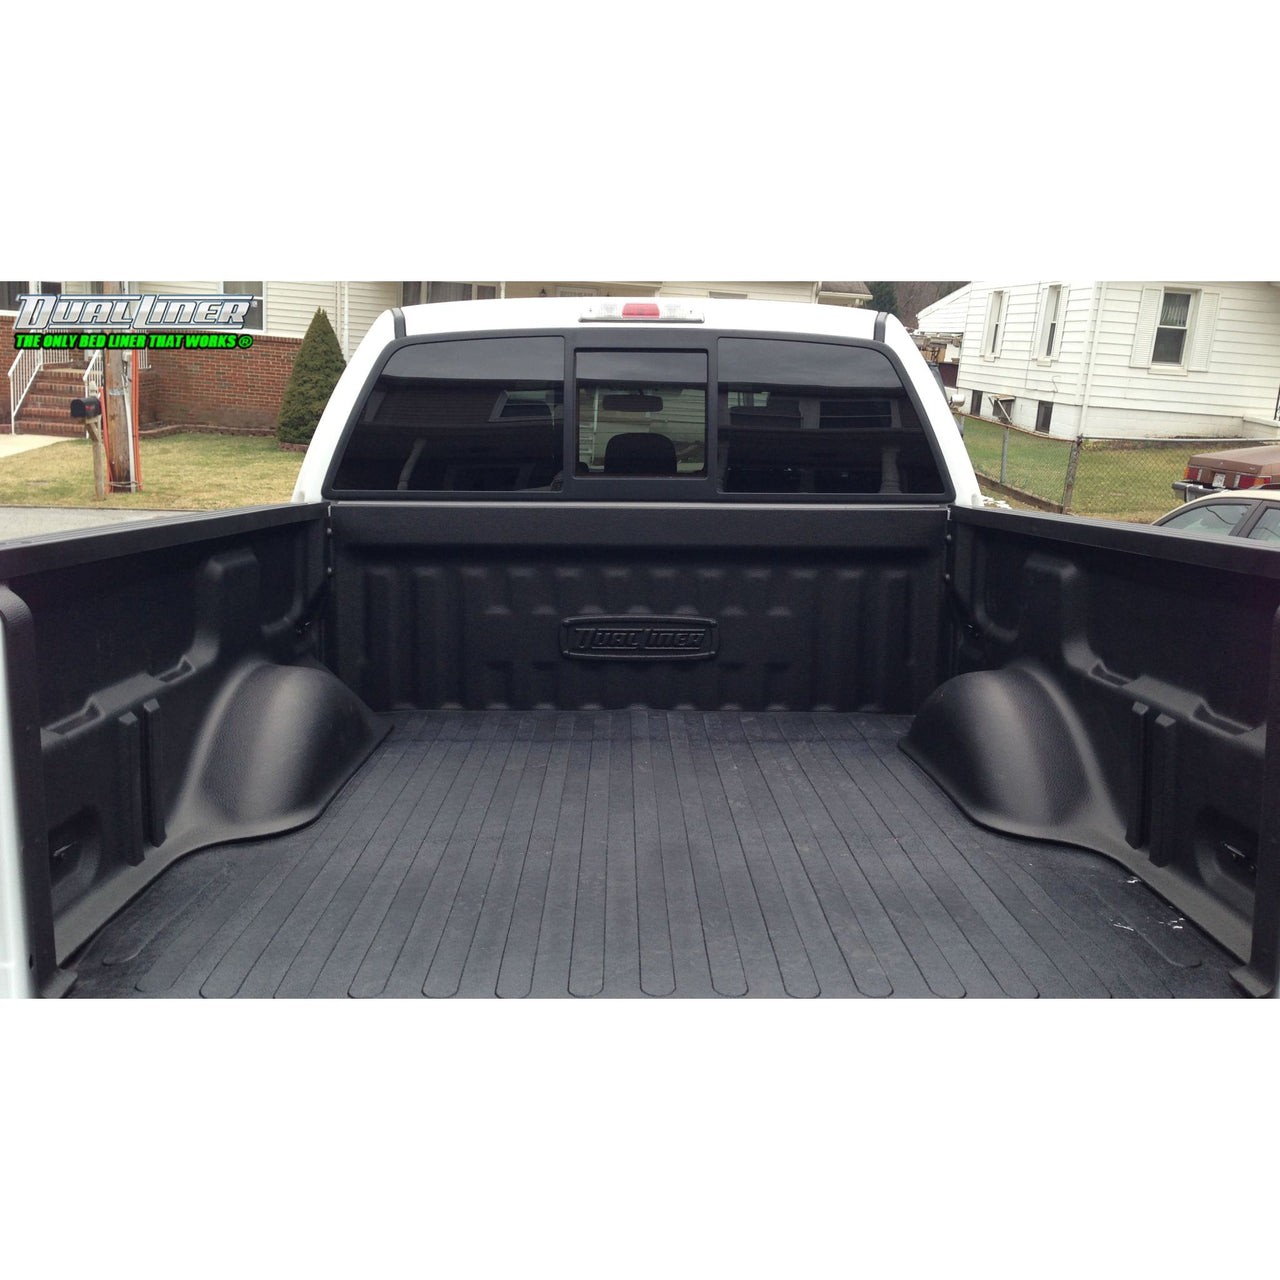 DualLiner 2021 to 2022 F-150 (no LED Light Bar, WITH Tailgate Work Surface) - Short 5.5' Bed